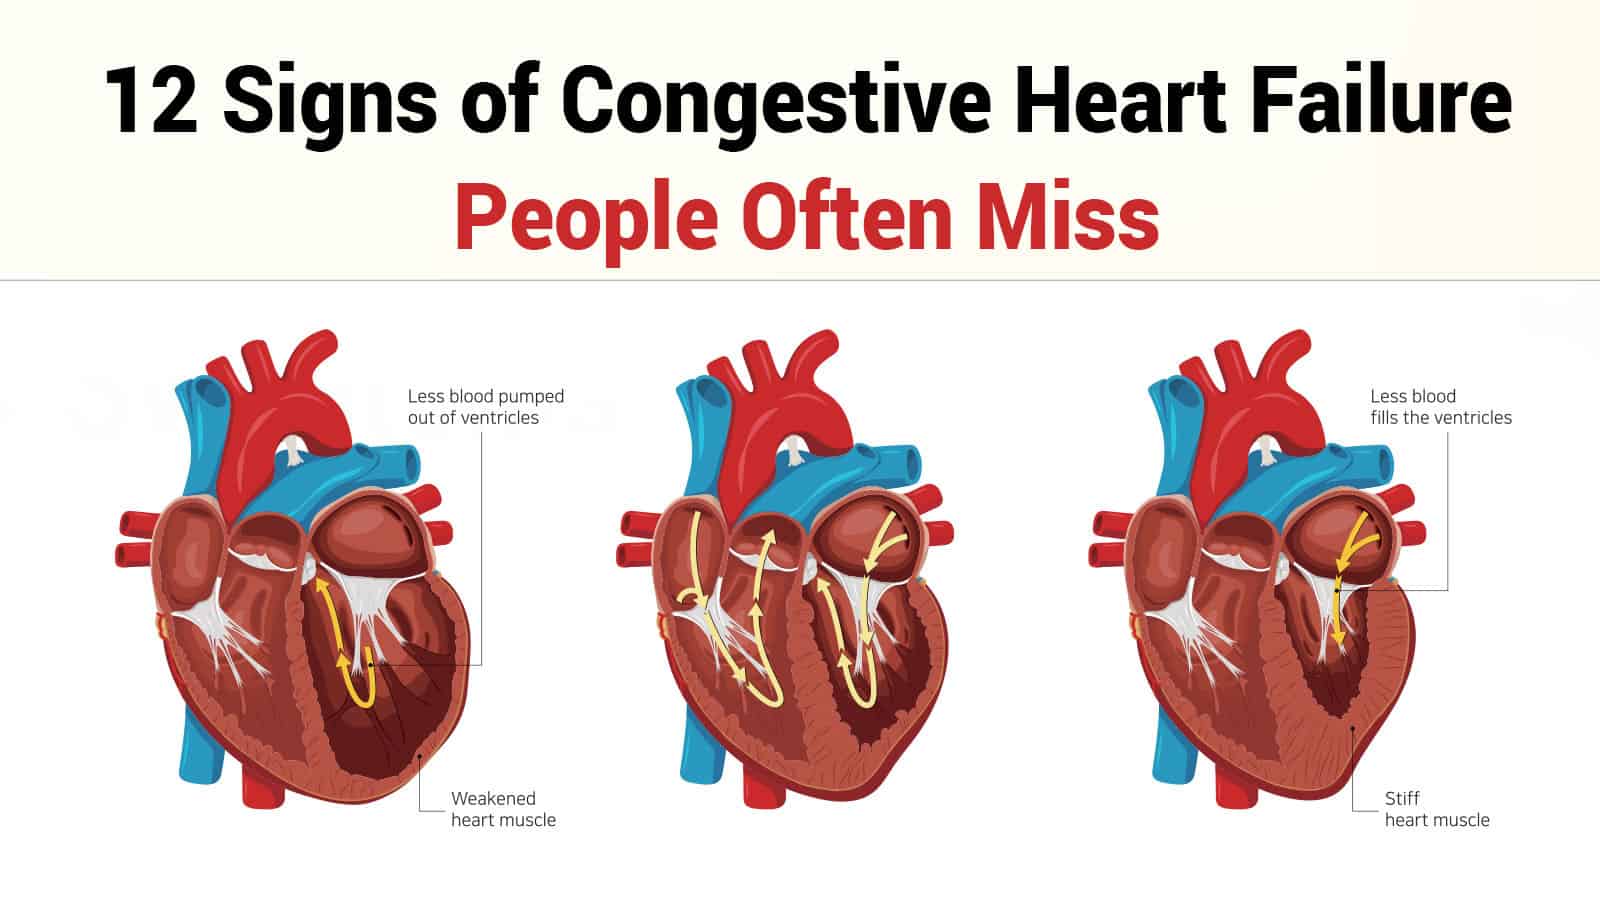 12 Signs of Congestive Heart Failure People Often Miss